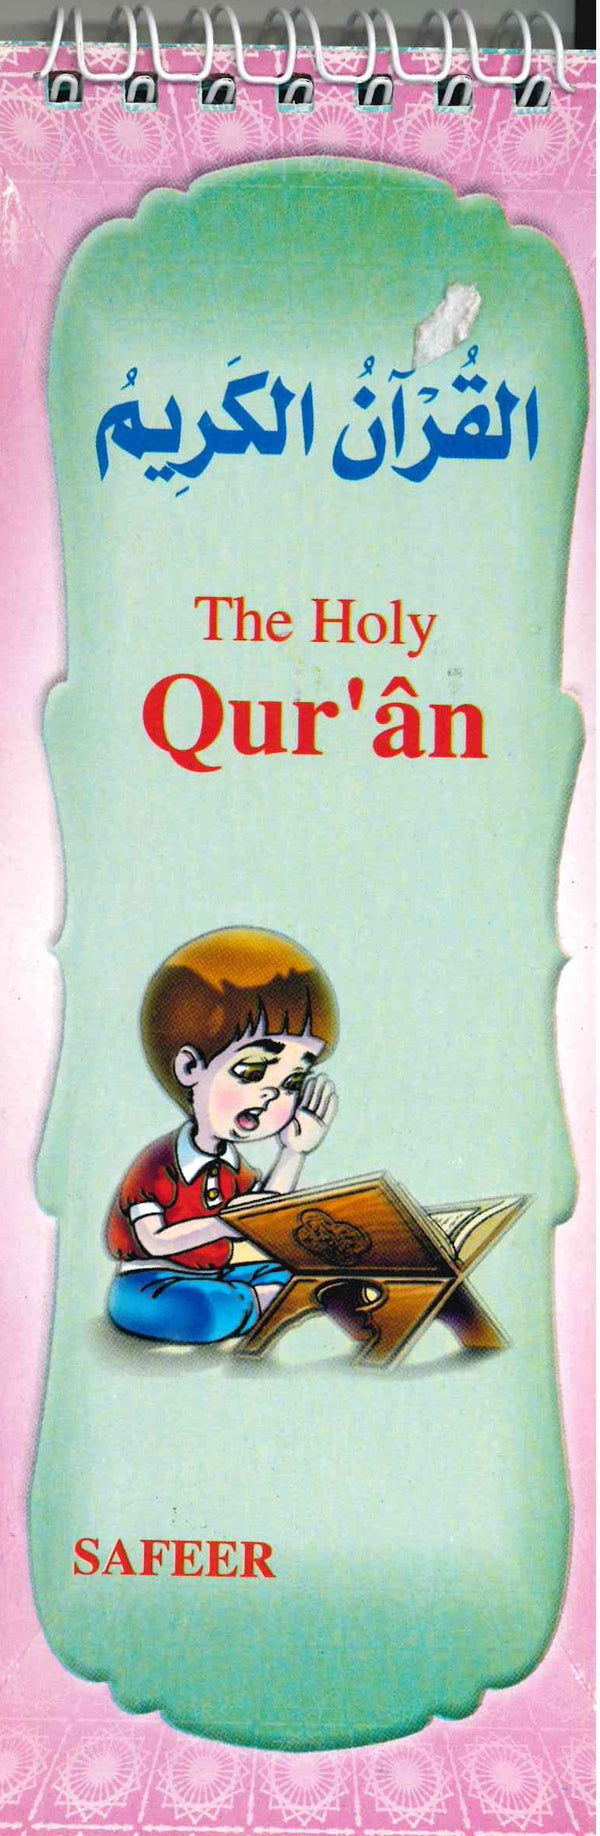 The Holy Quran by Safeer